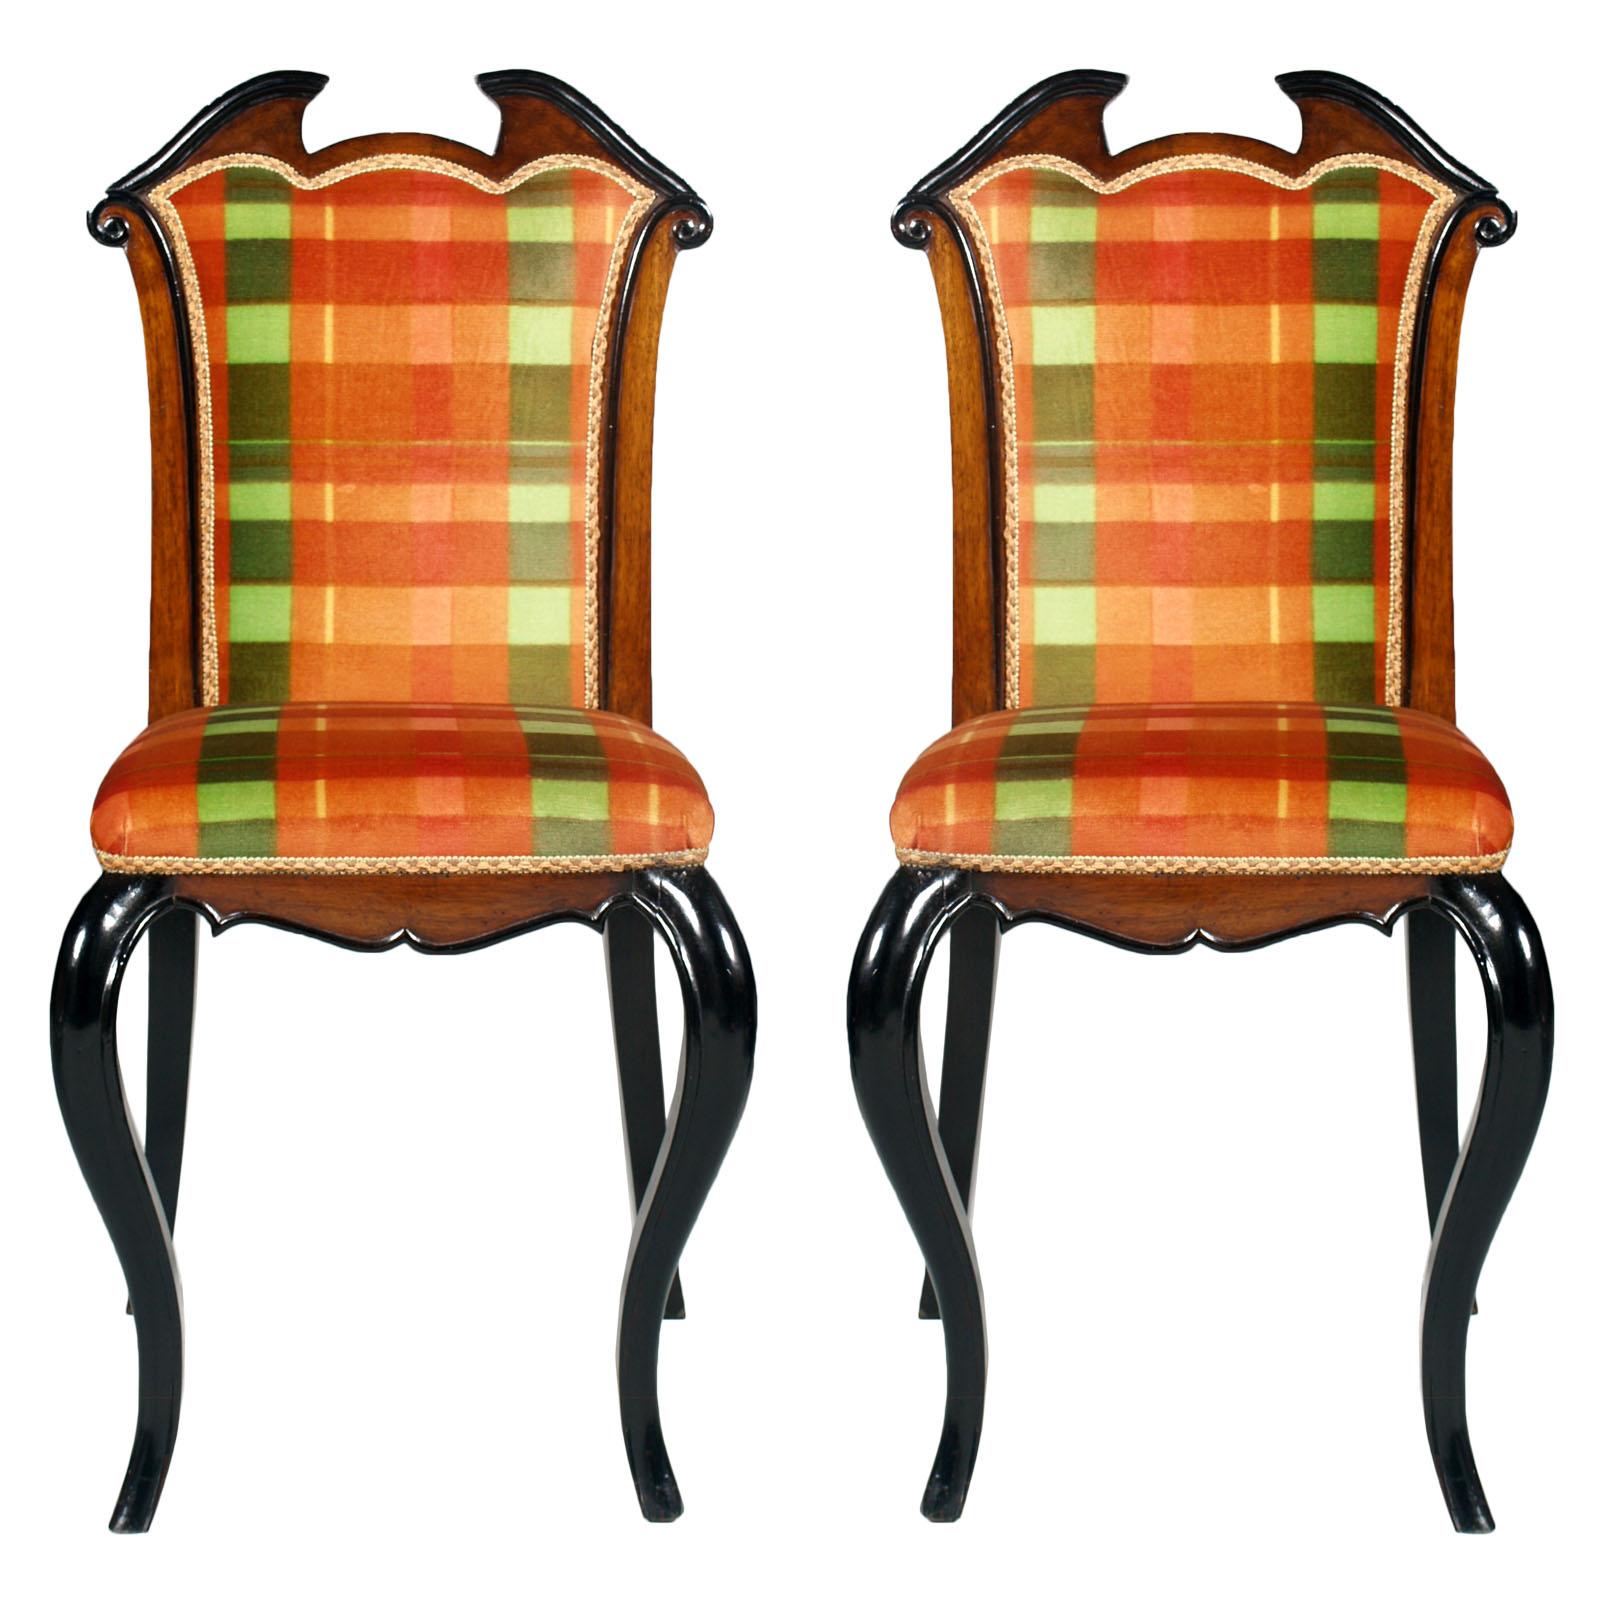 Neoclassical Revival 1930s Italian Pair of Chairs and Armchair, Paolo Buffa Attributed, from Cantù For Sale